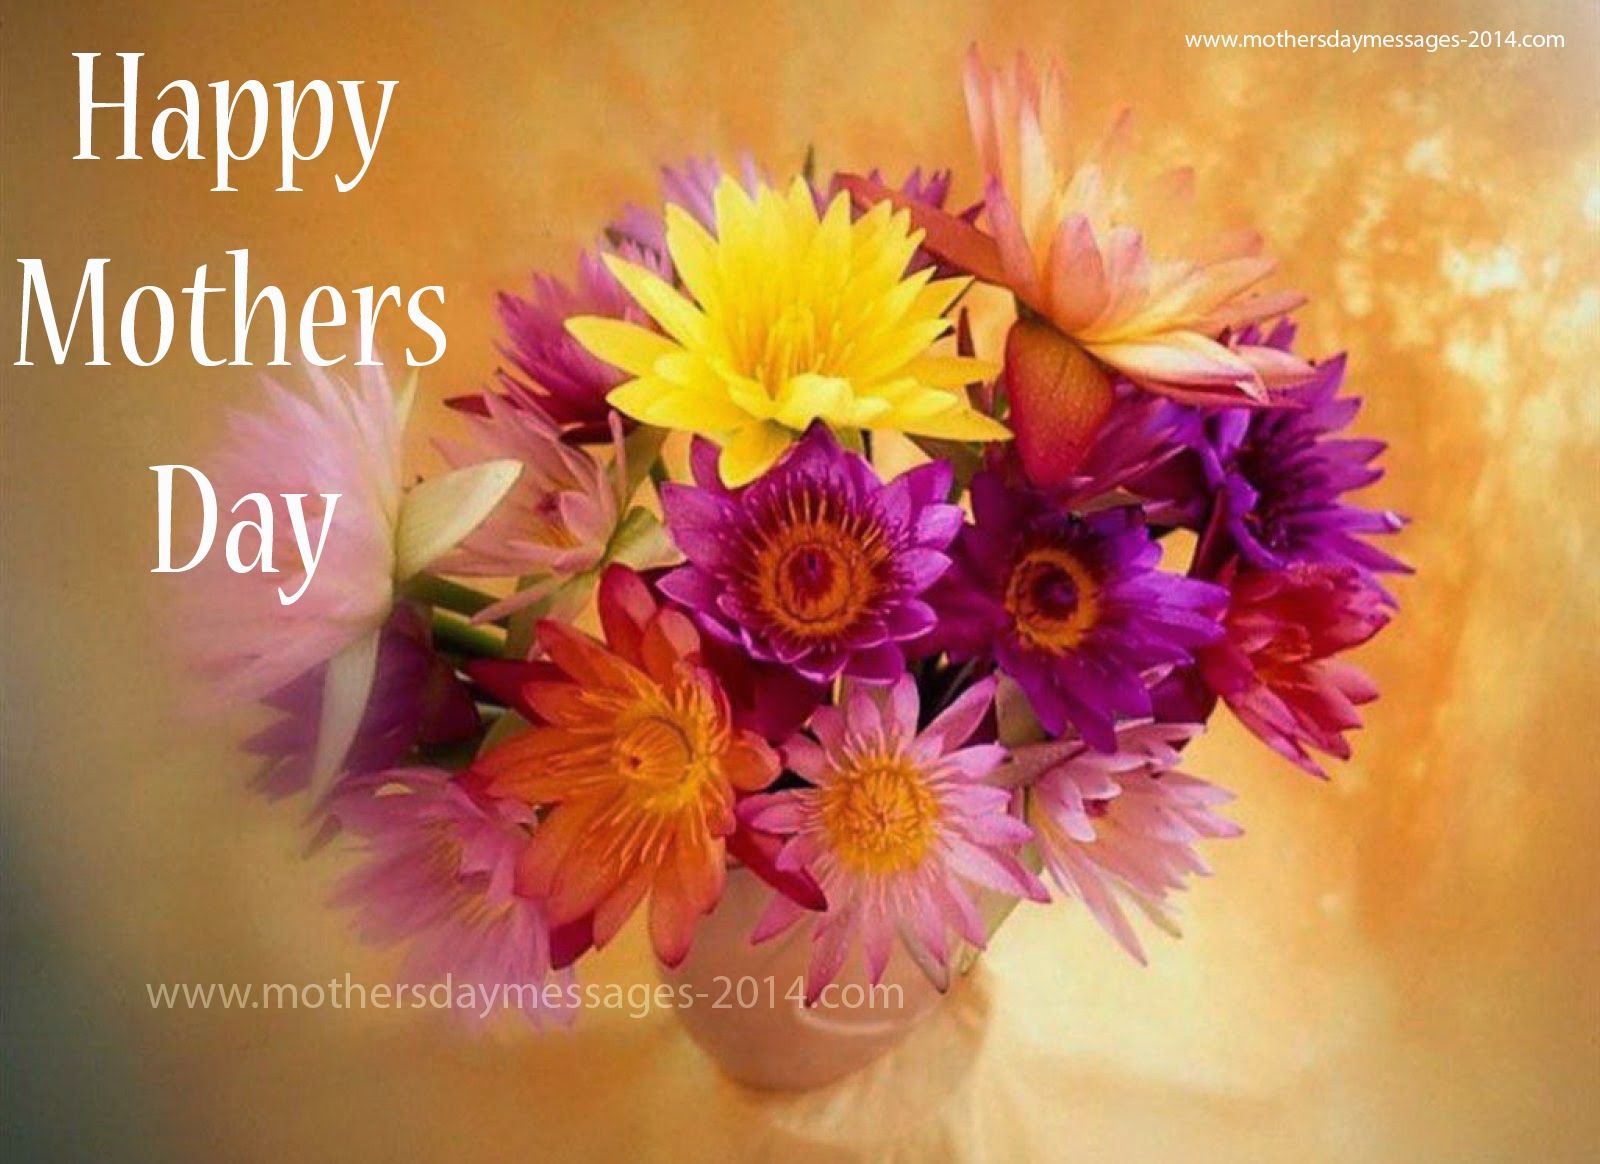 Happy Moother's day songs lyrics, list Free Download. Beautiful flowers, Beautiful flowers image, Mothers day flowers